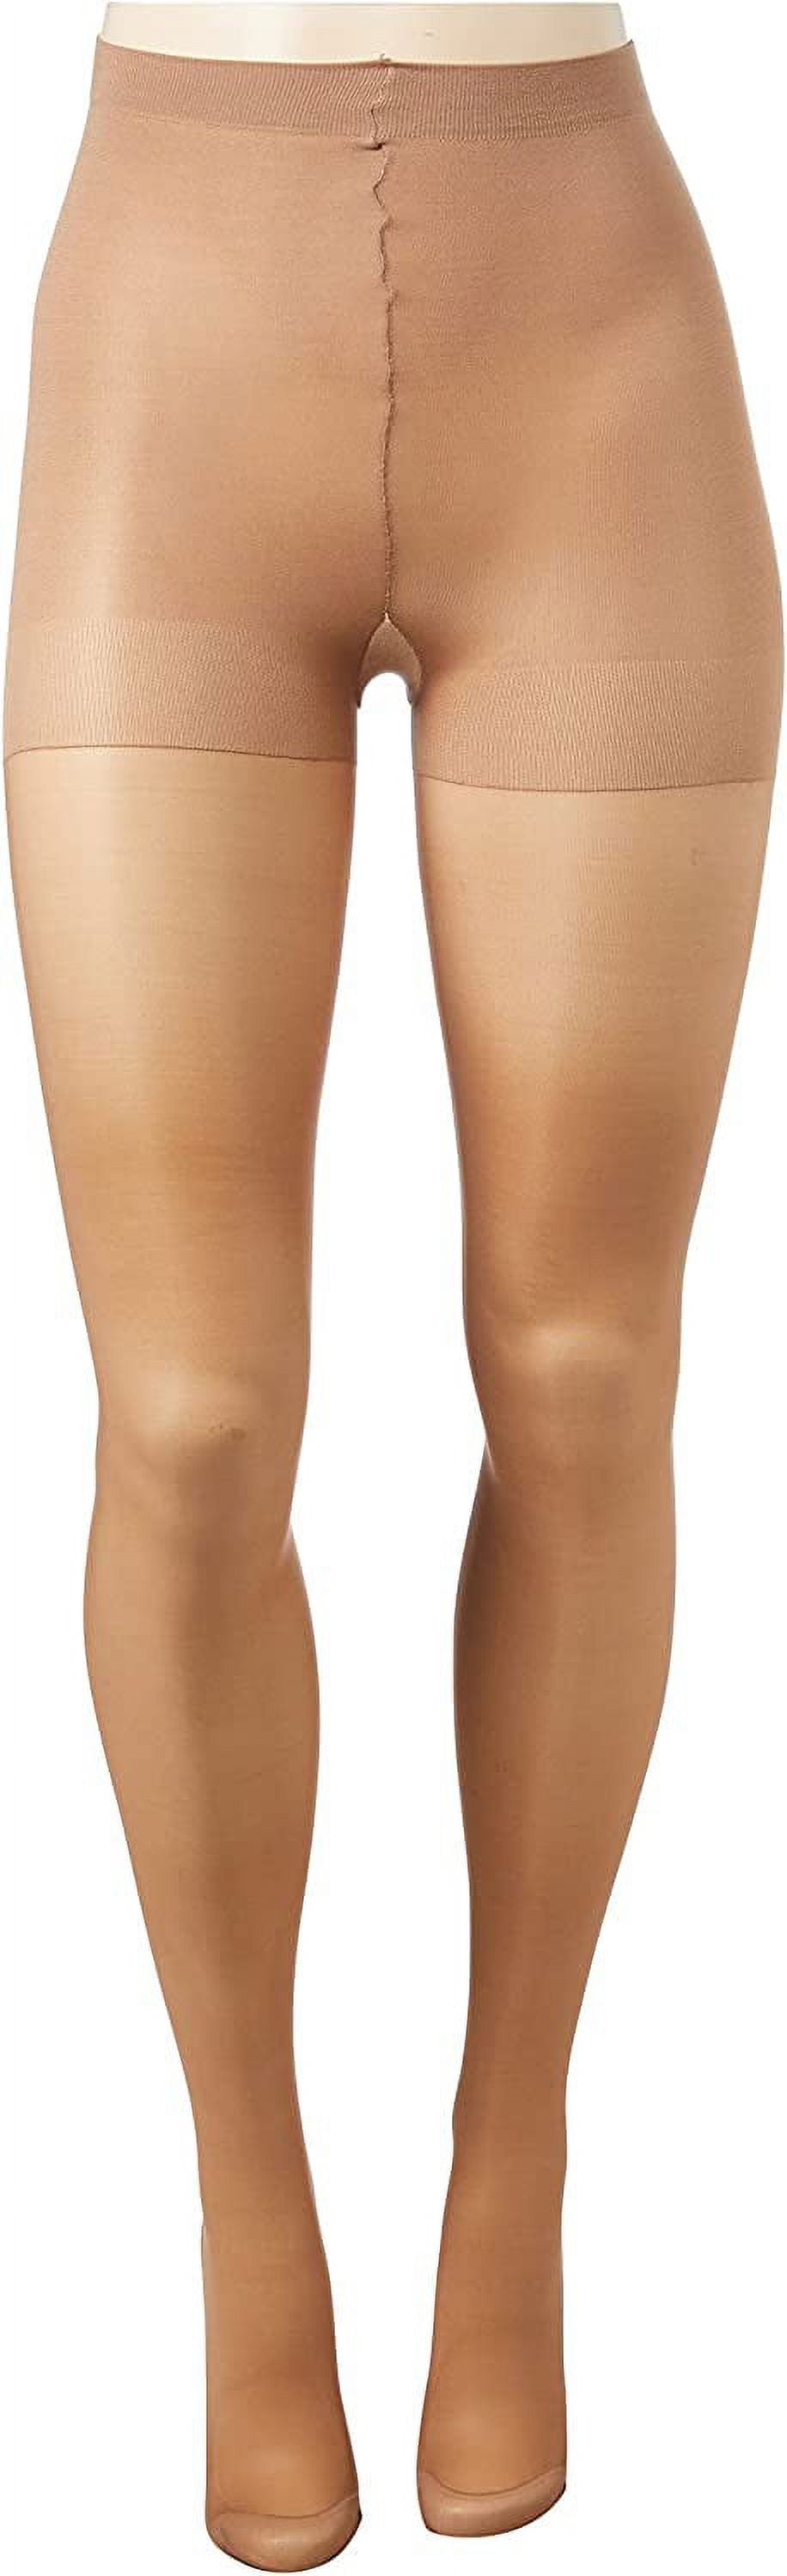 Hanes Hanes Alive Full Support Control Top Pantyhose 6-Pack & Reviews